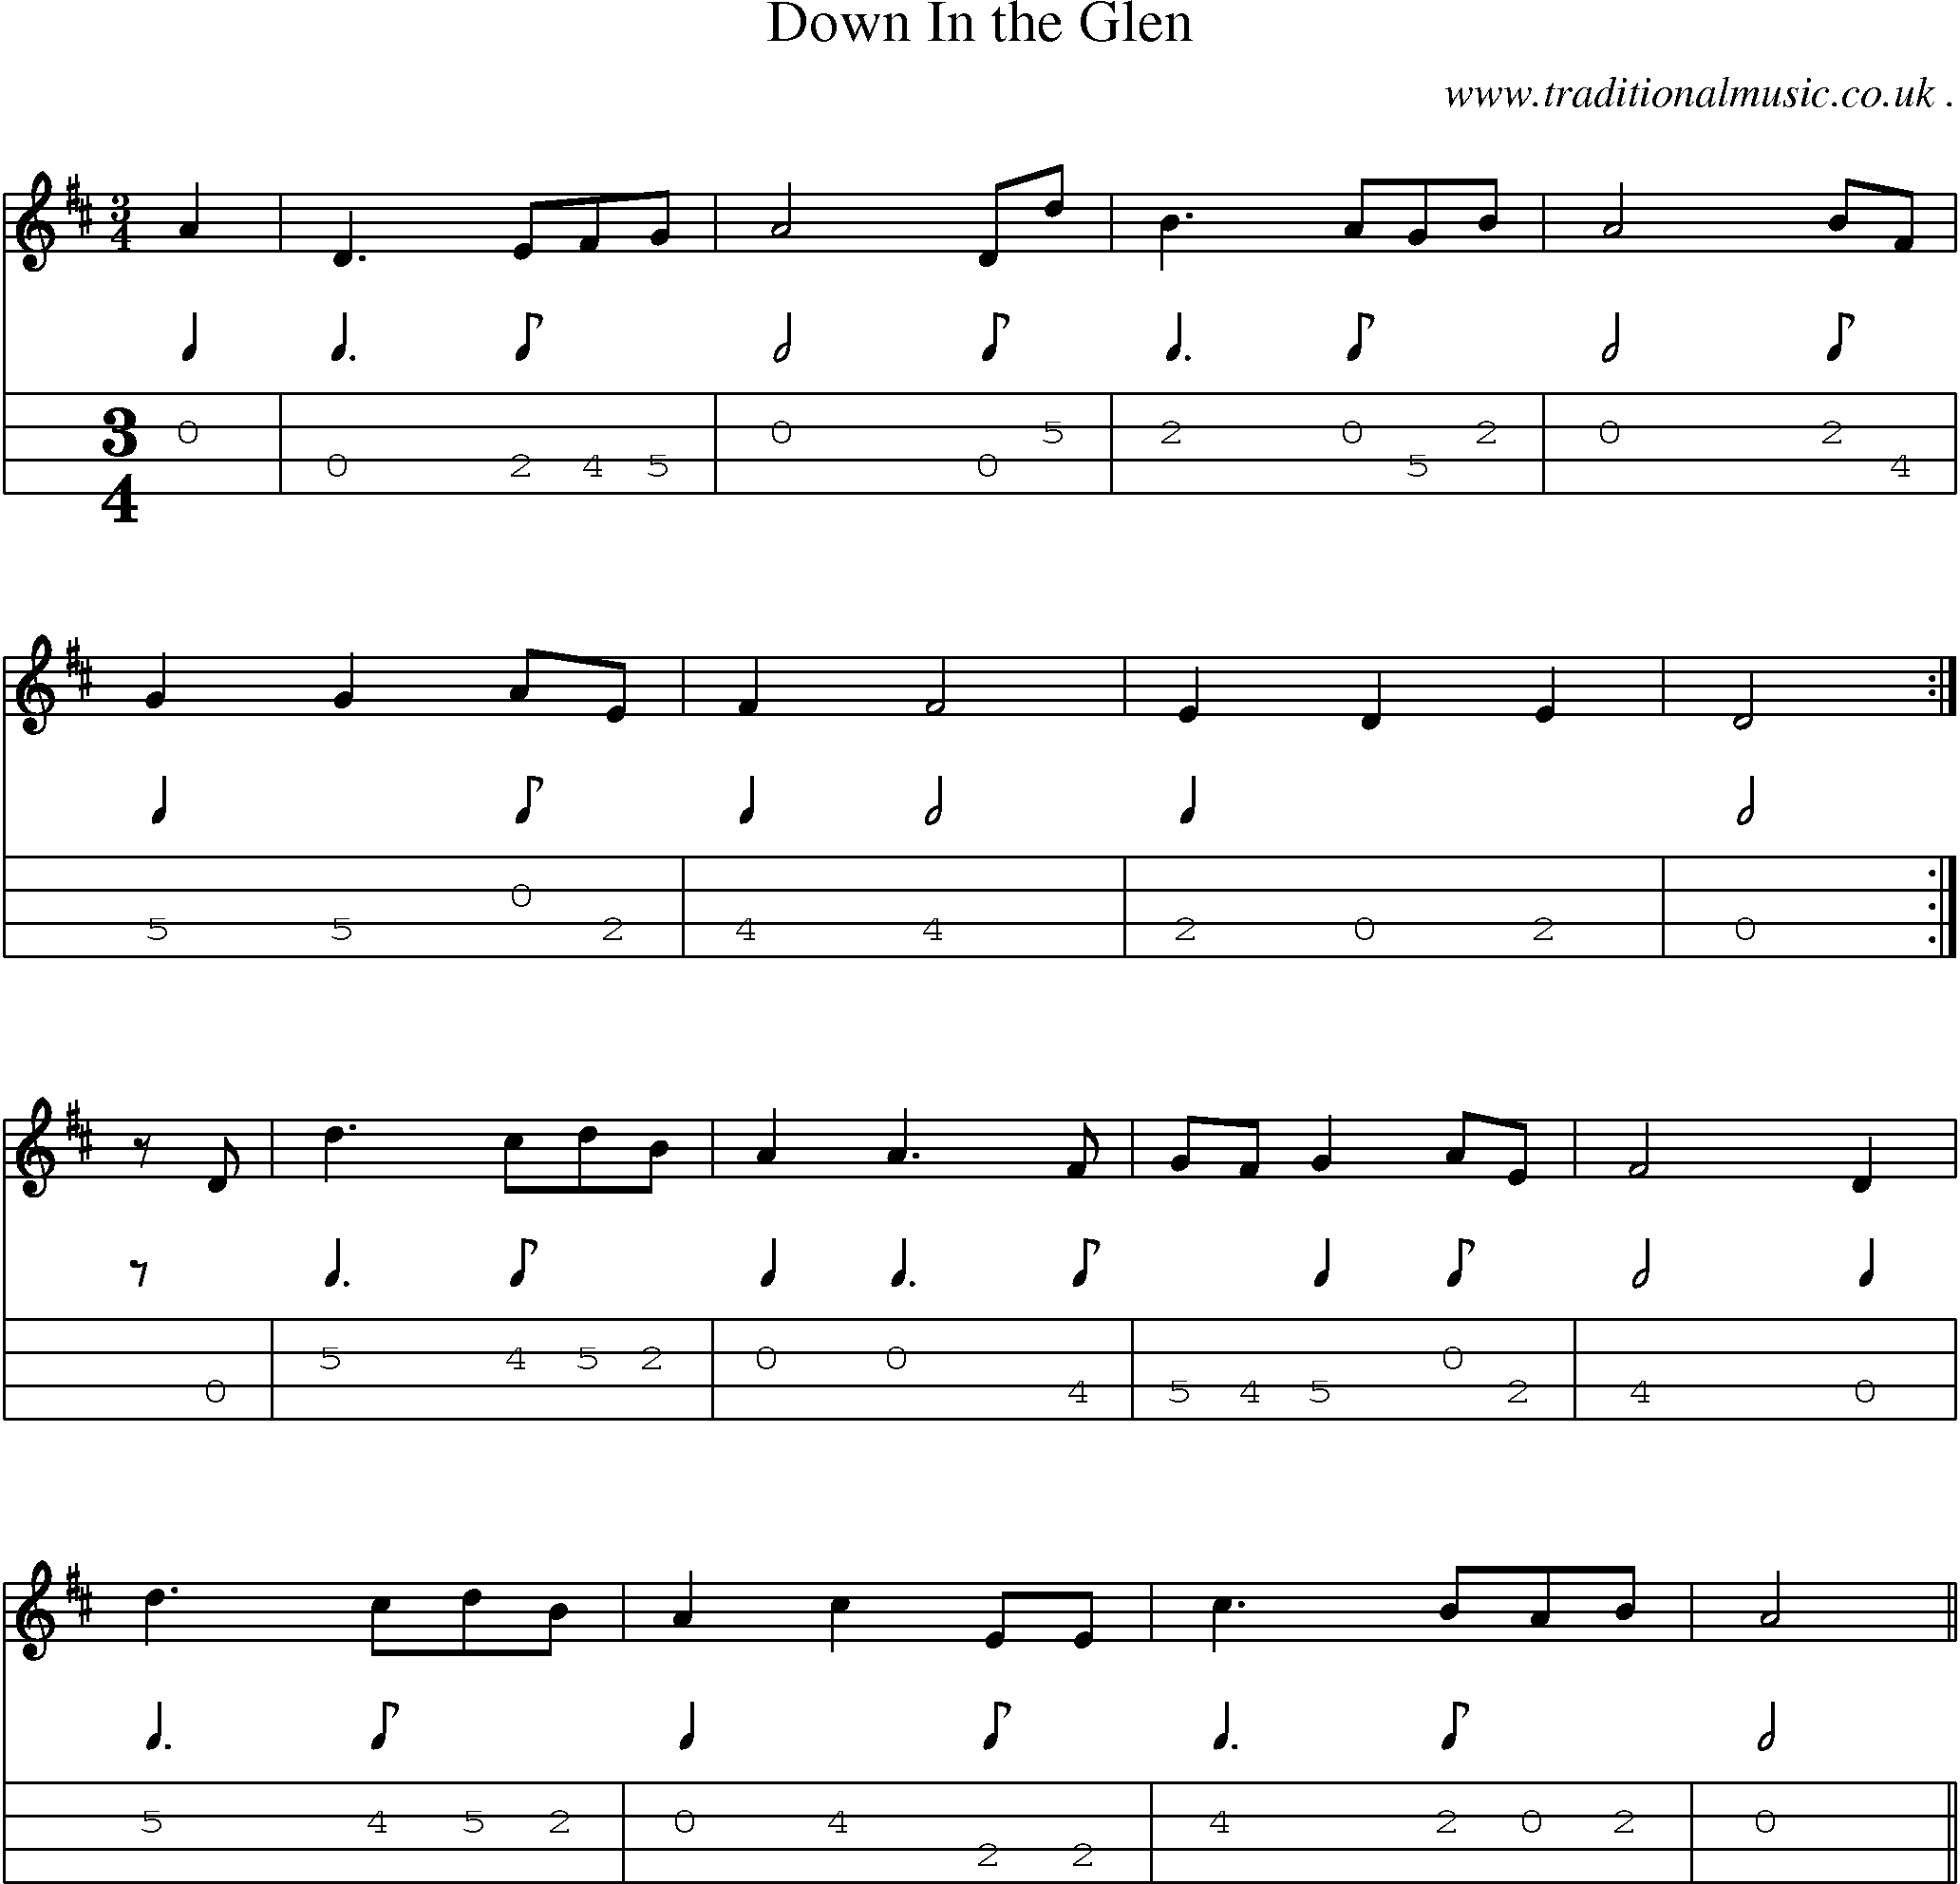 Sheet-music  score, Chords and Mandolin Tabs for Down In The Glen